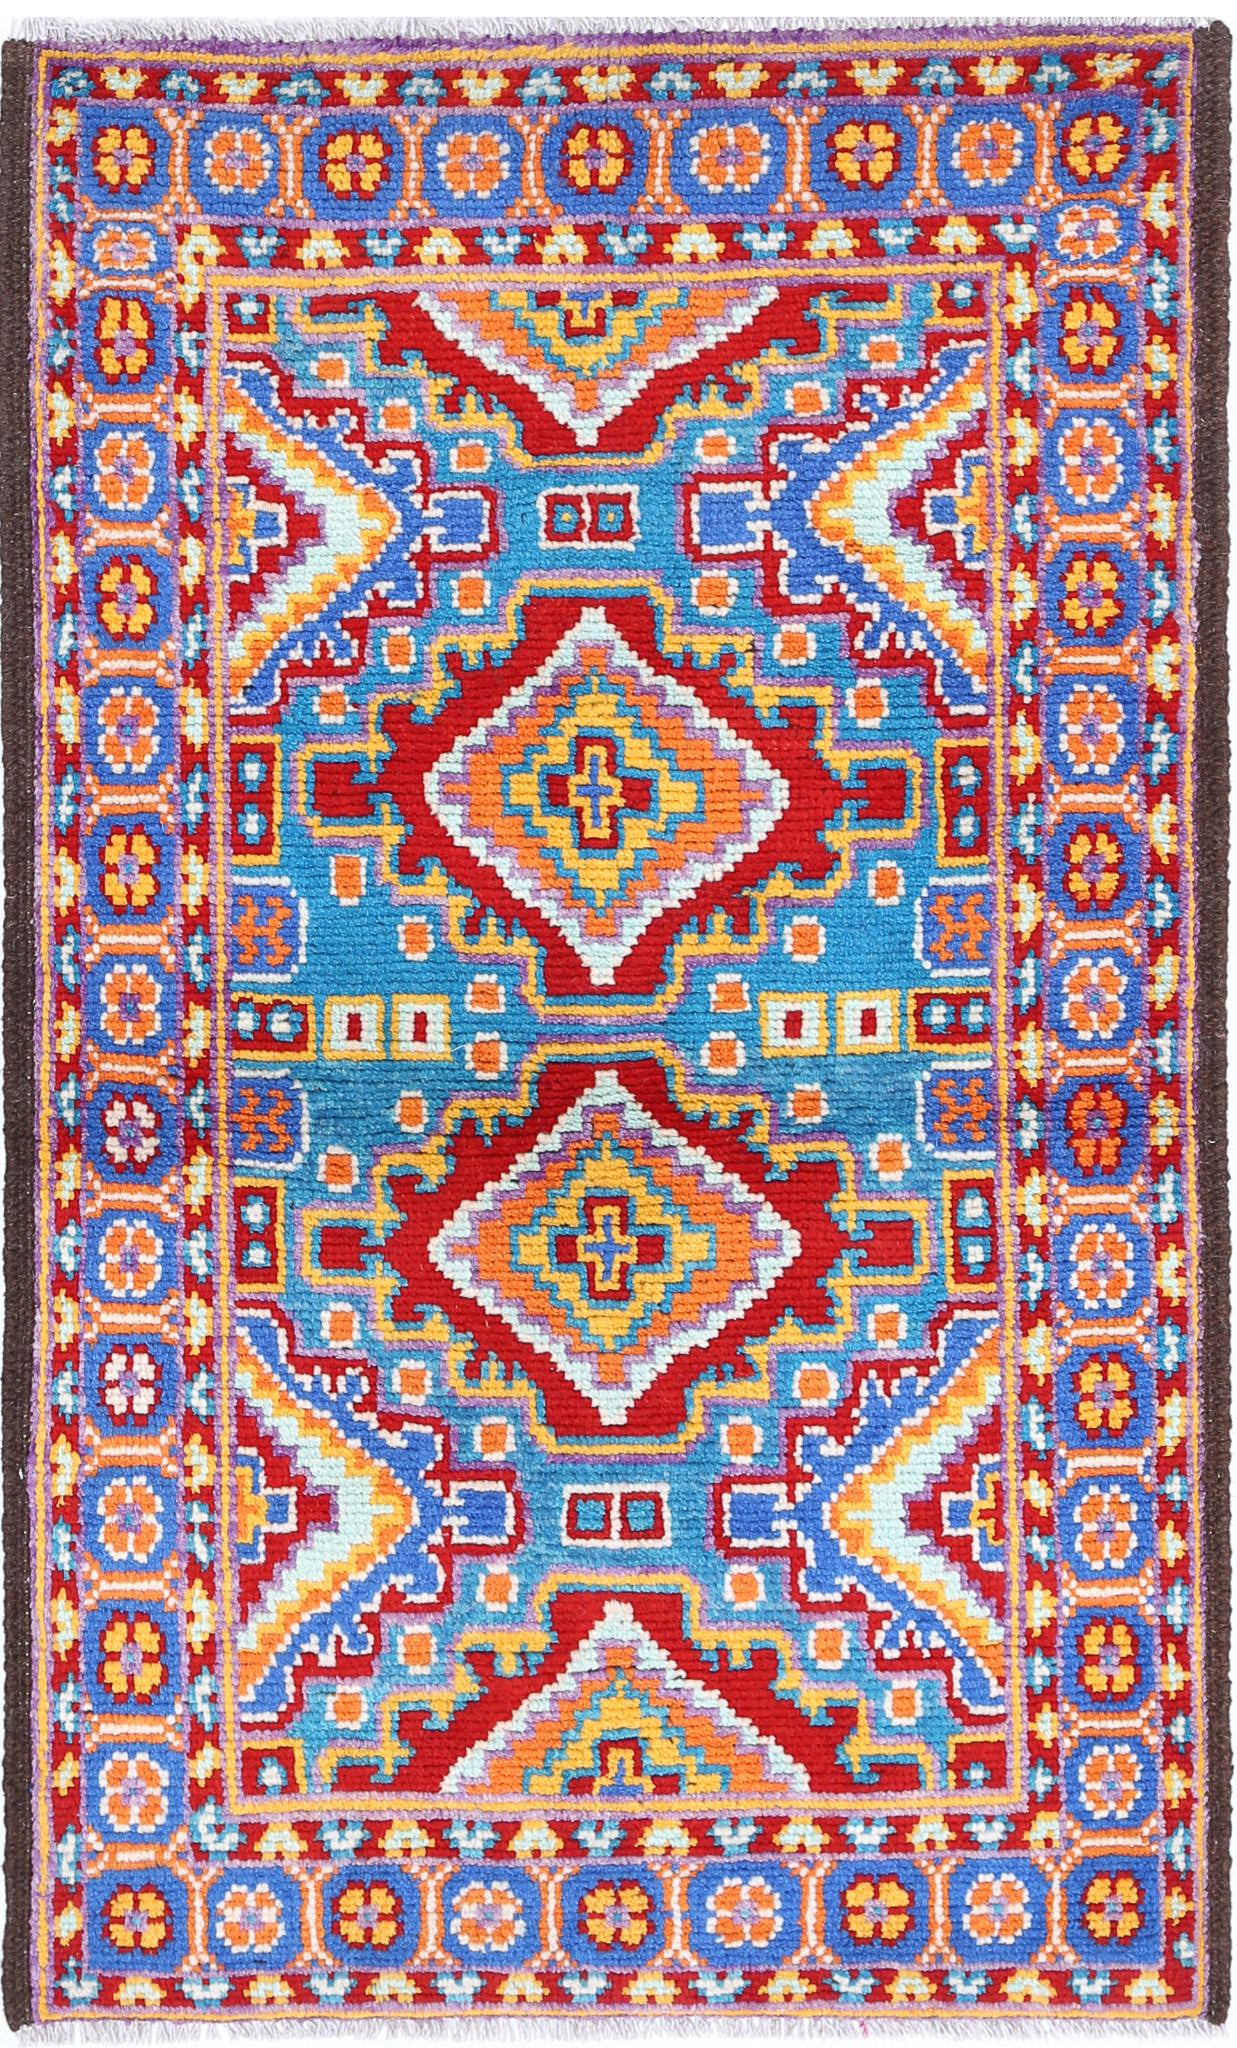 Revival-hand-knotted-qarghani-wool-rug-5014193.jpg